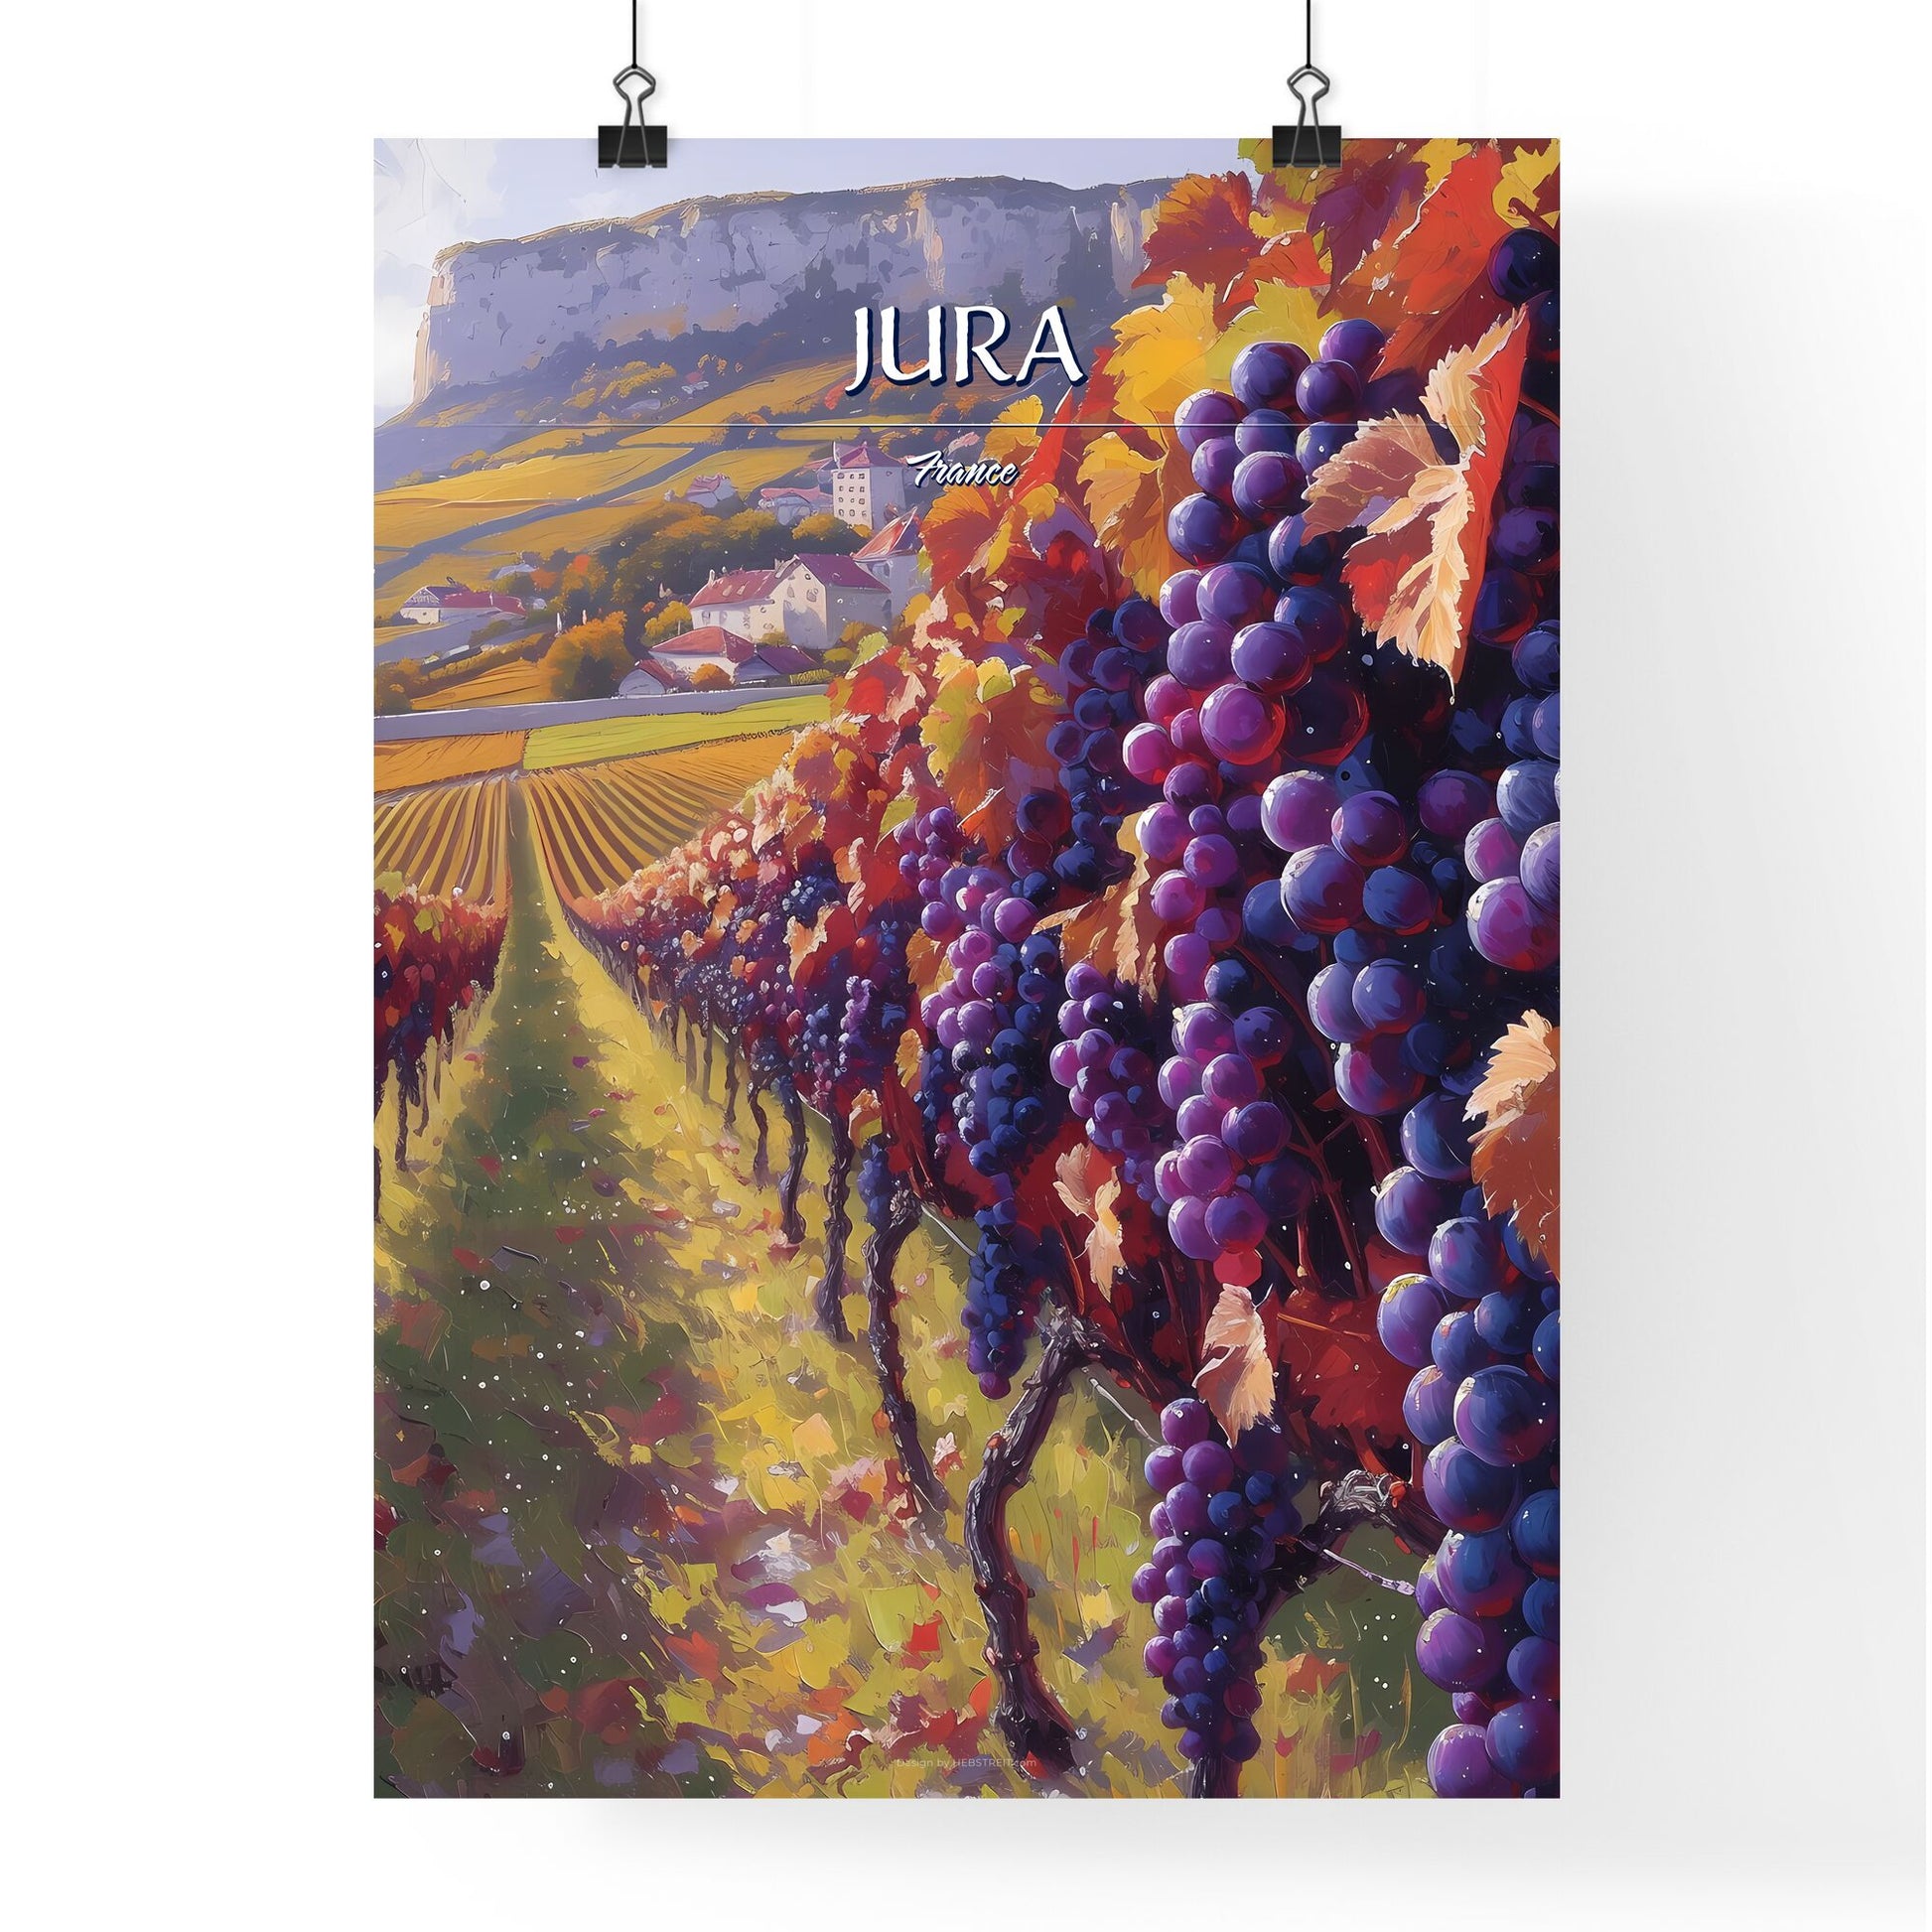 Jura, France - Art print of a vineyard with grapes on the vine Default Title